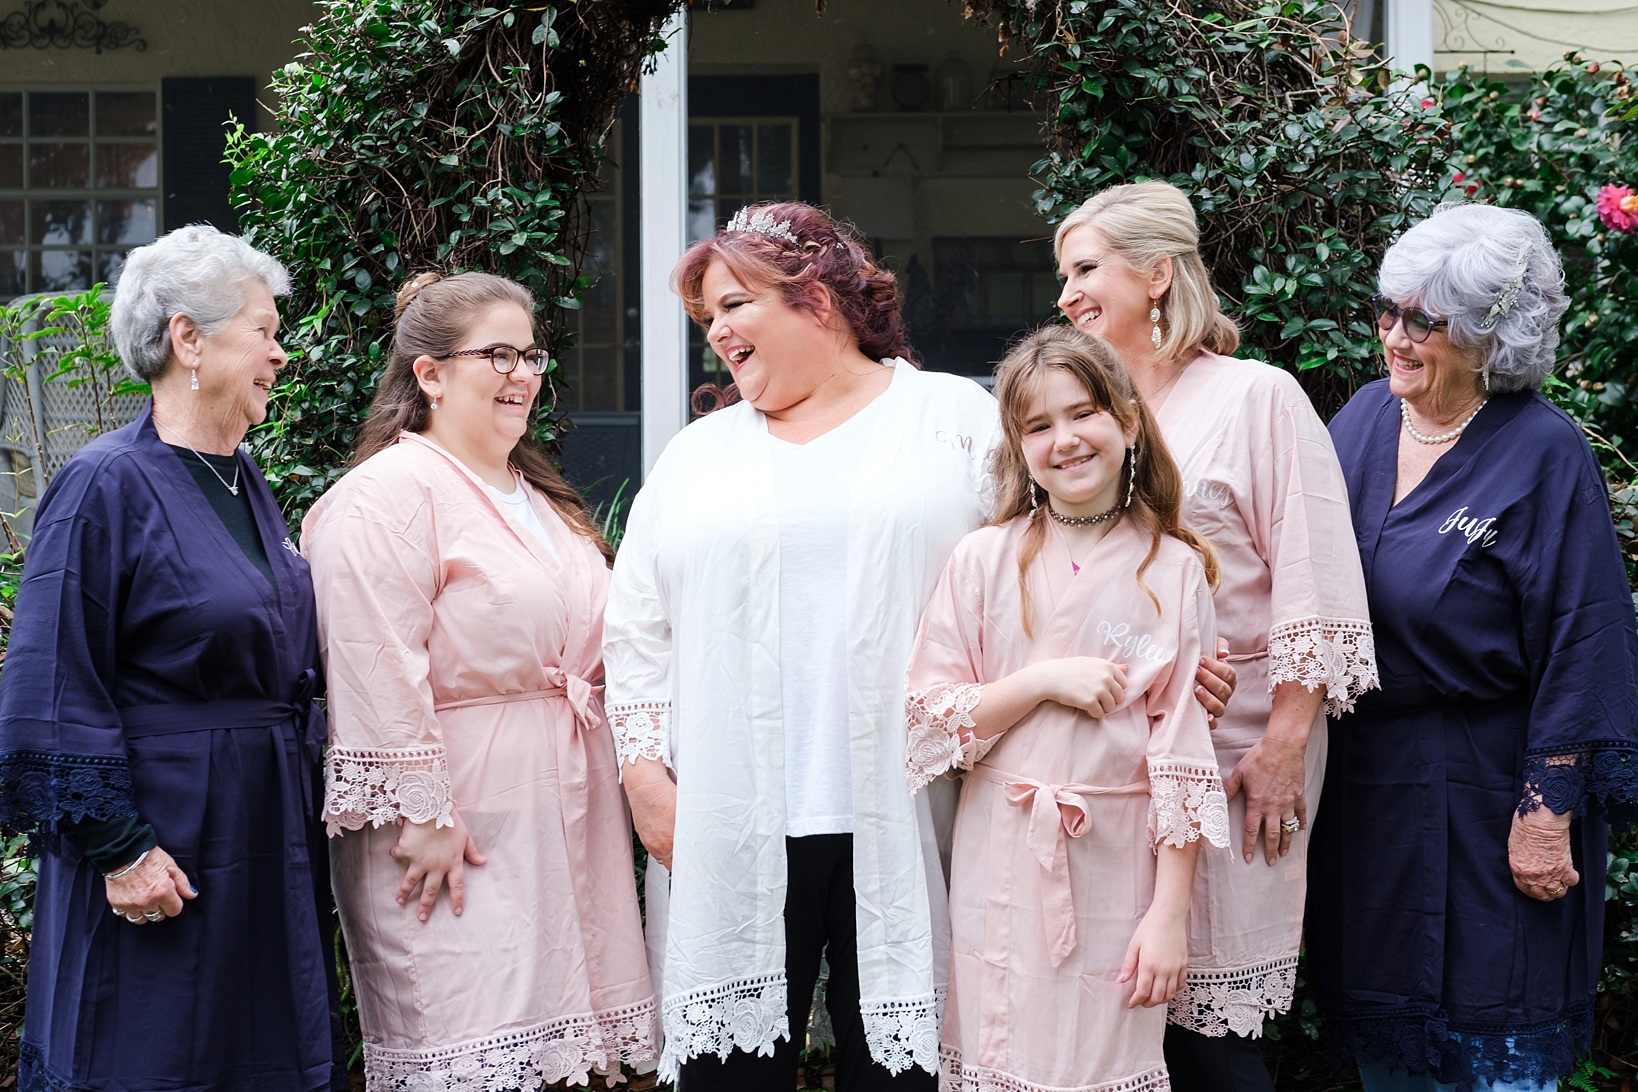 The Bride and her Bridesmaids in robes before the huge cross creek wedding celebration